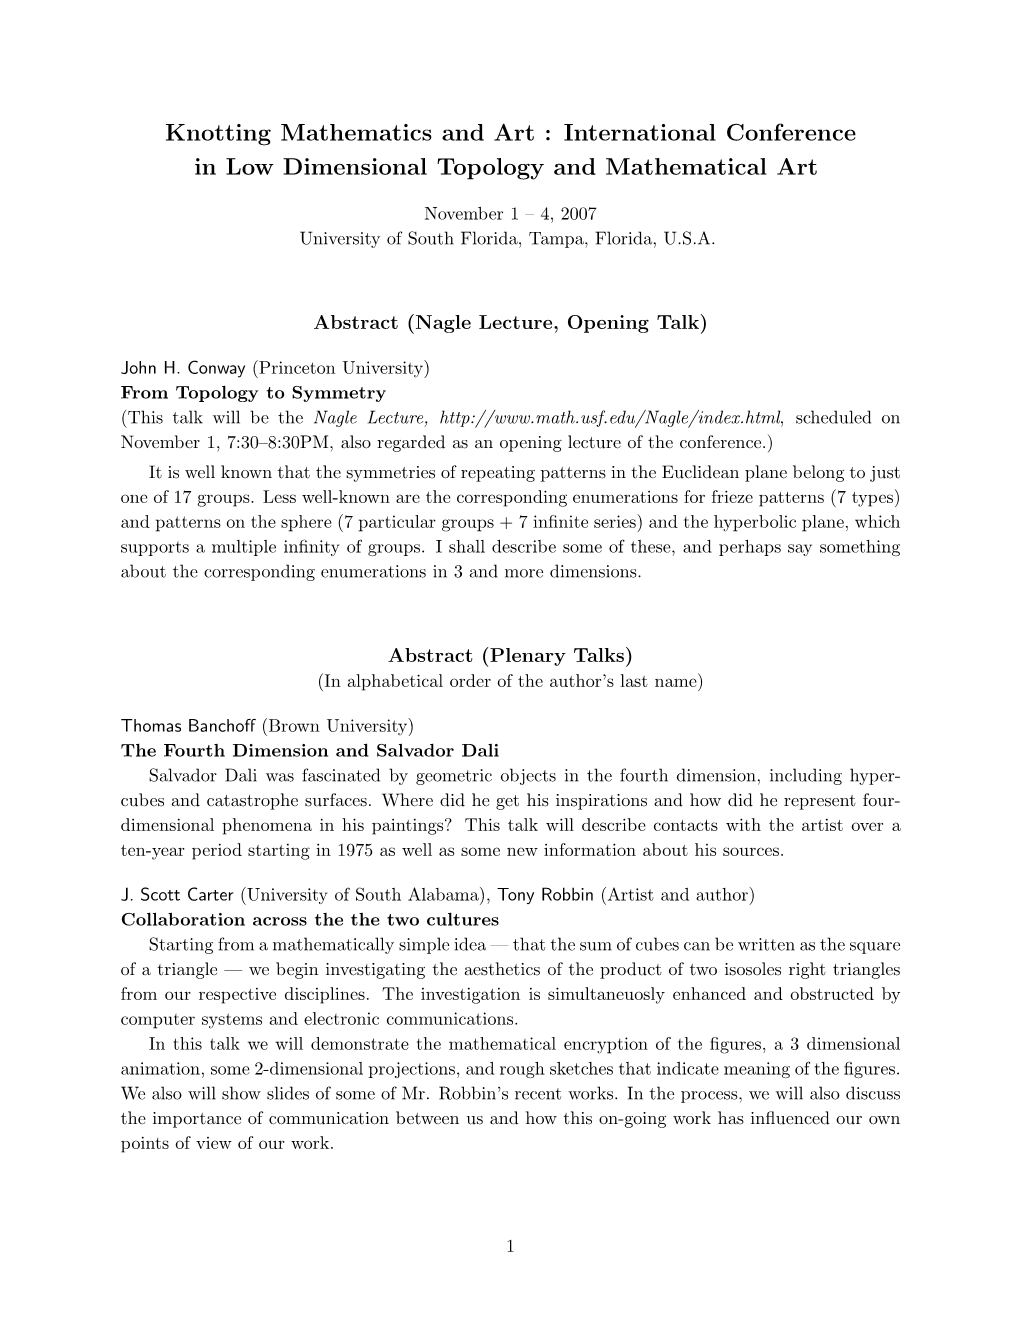 Knotting Mathematics and Art : International Conference in Low Dimensional Topology and Mathematical Art